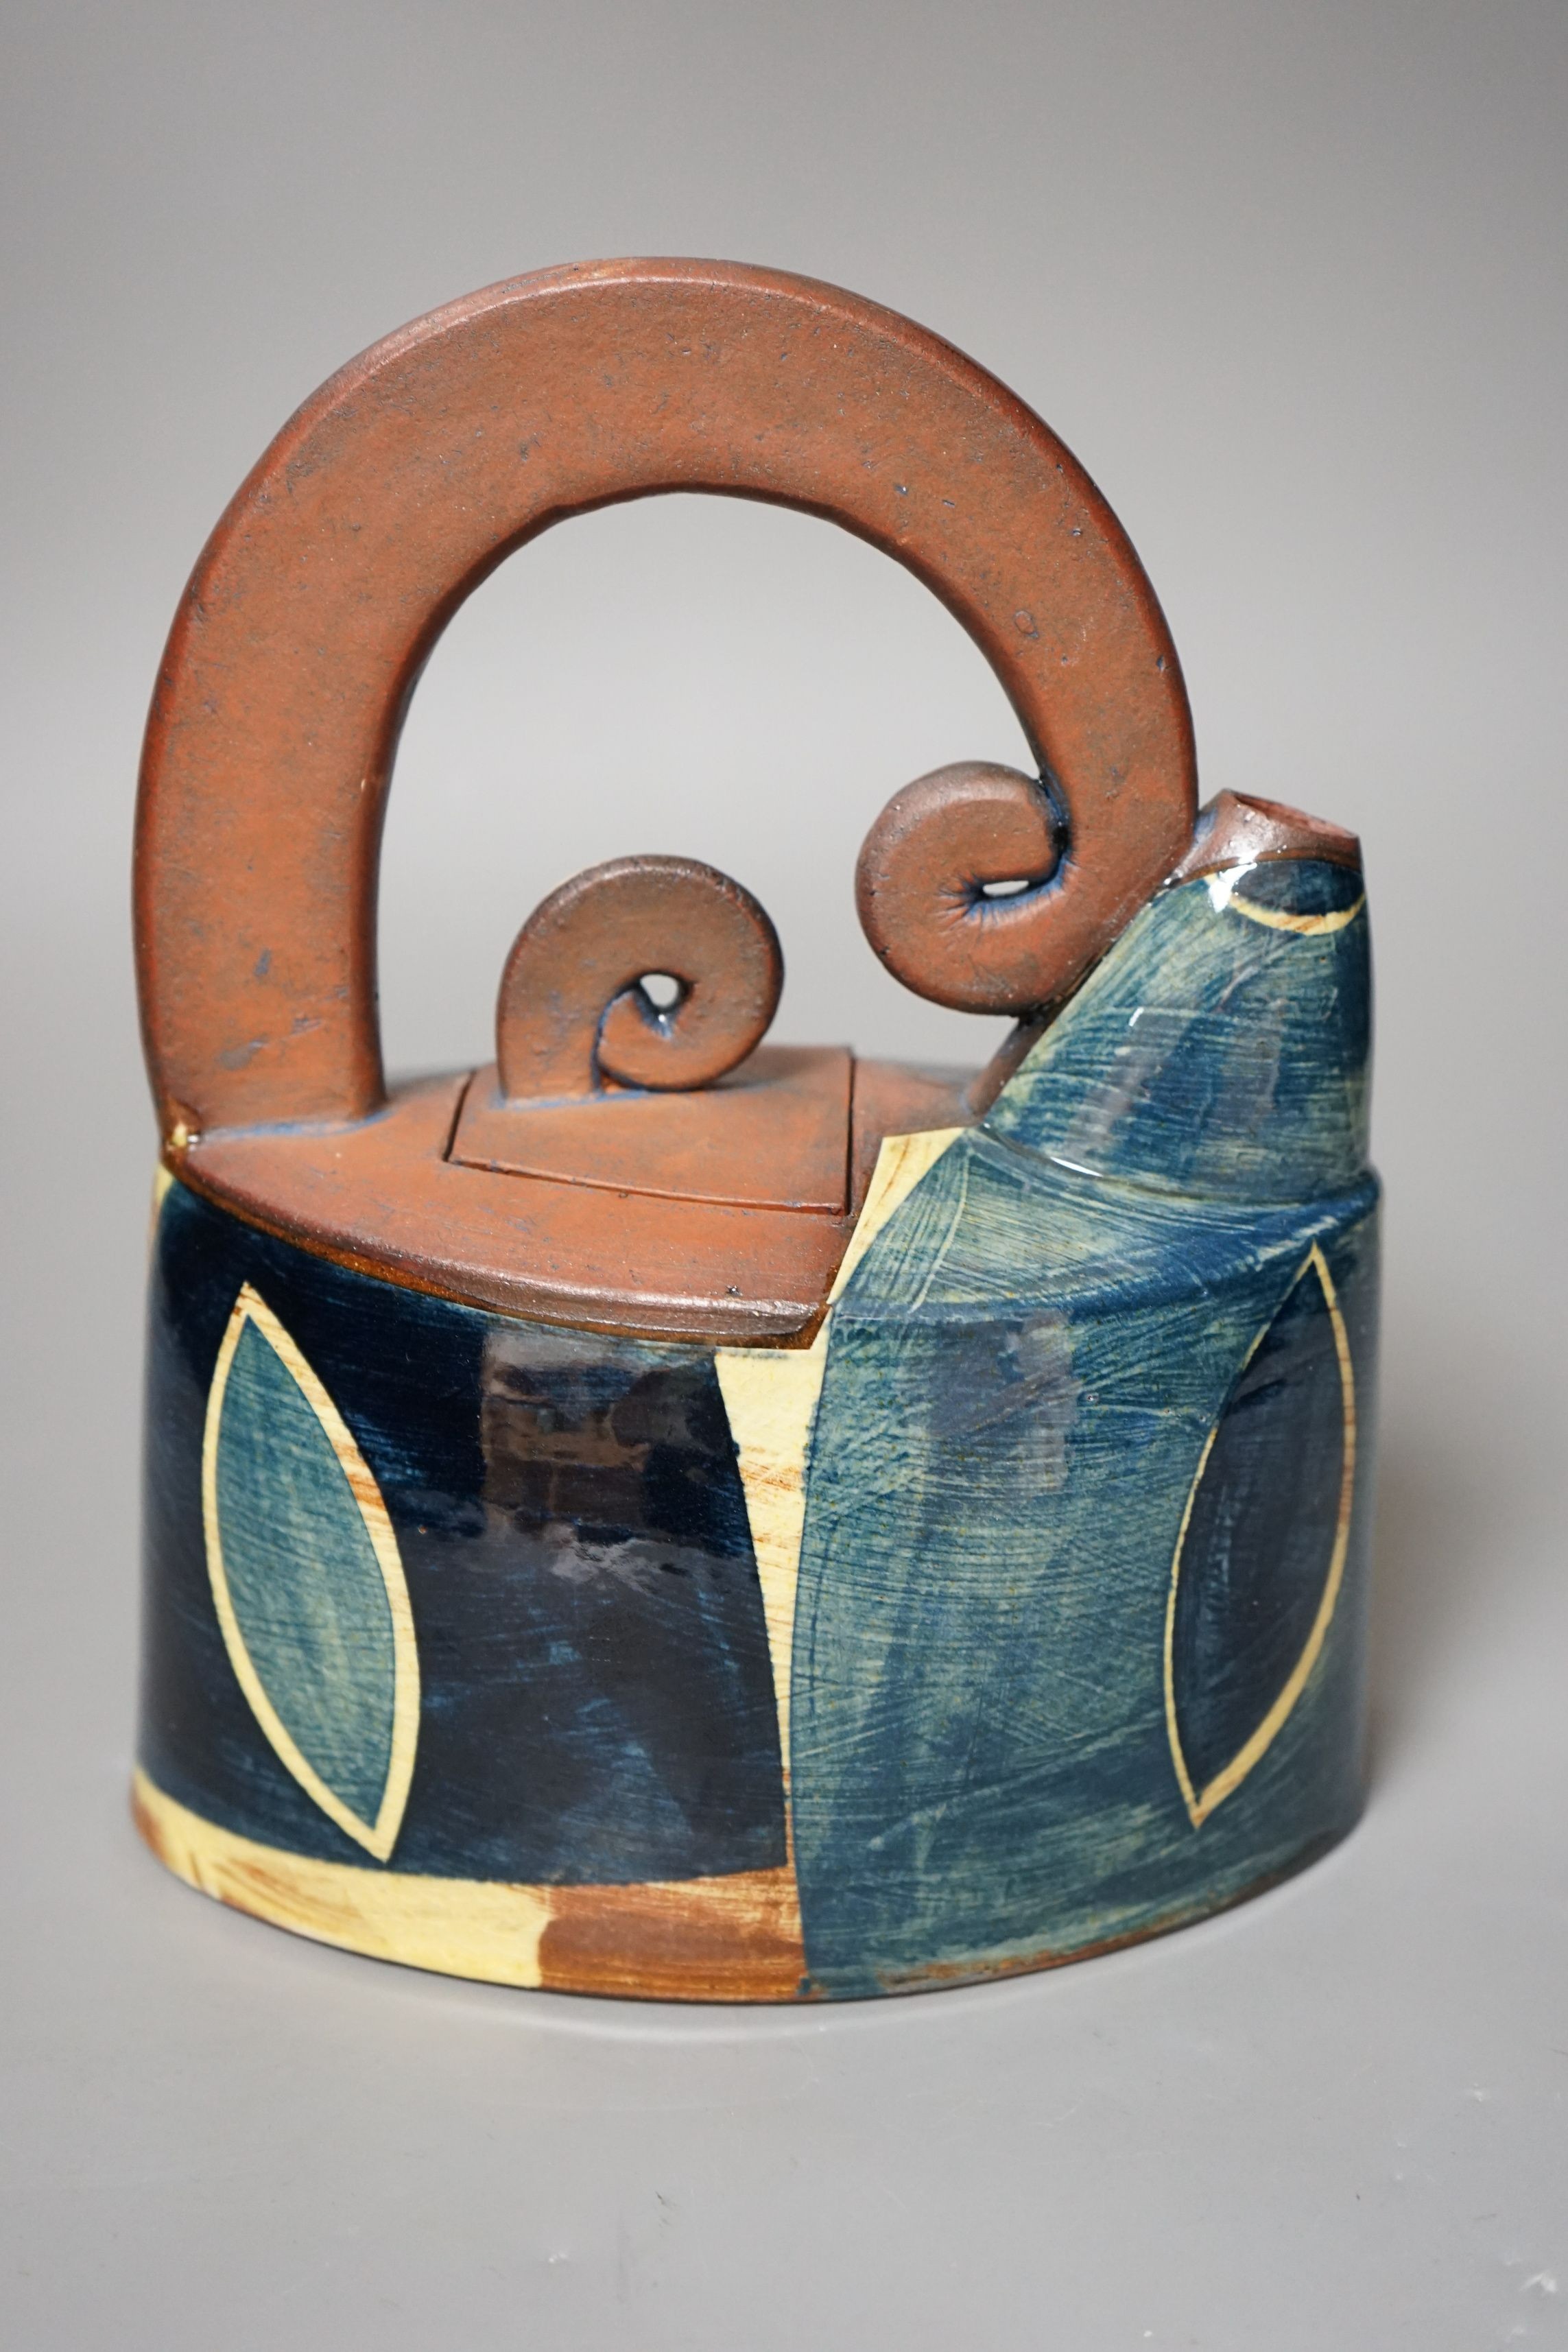 Richard Phethean (b.1953), an abstract green yellow and blue glazed earthenware teapot, purchased